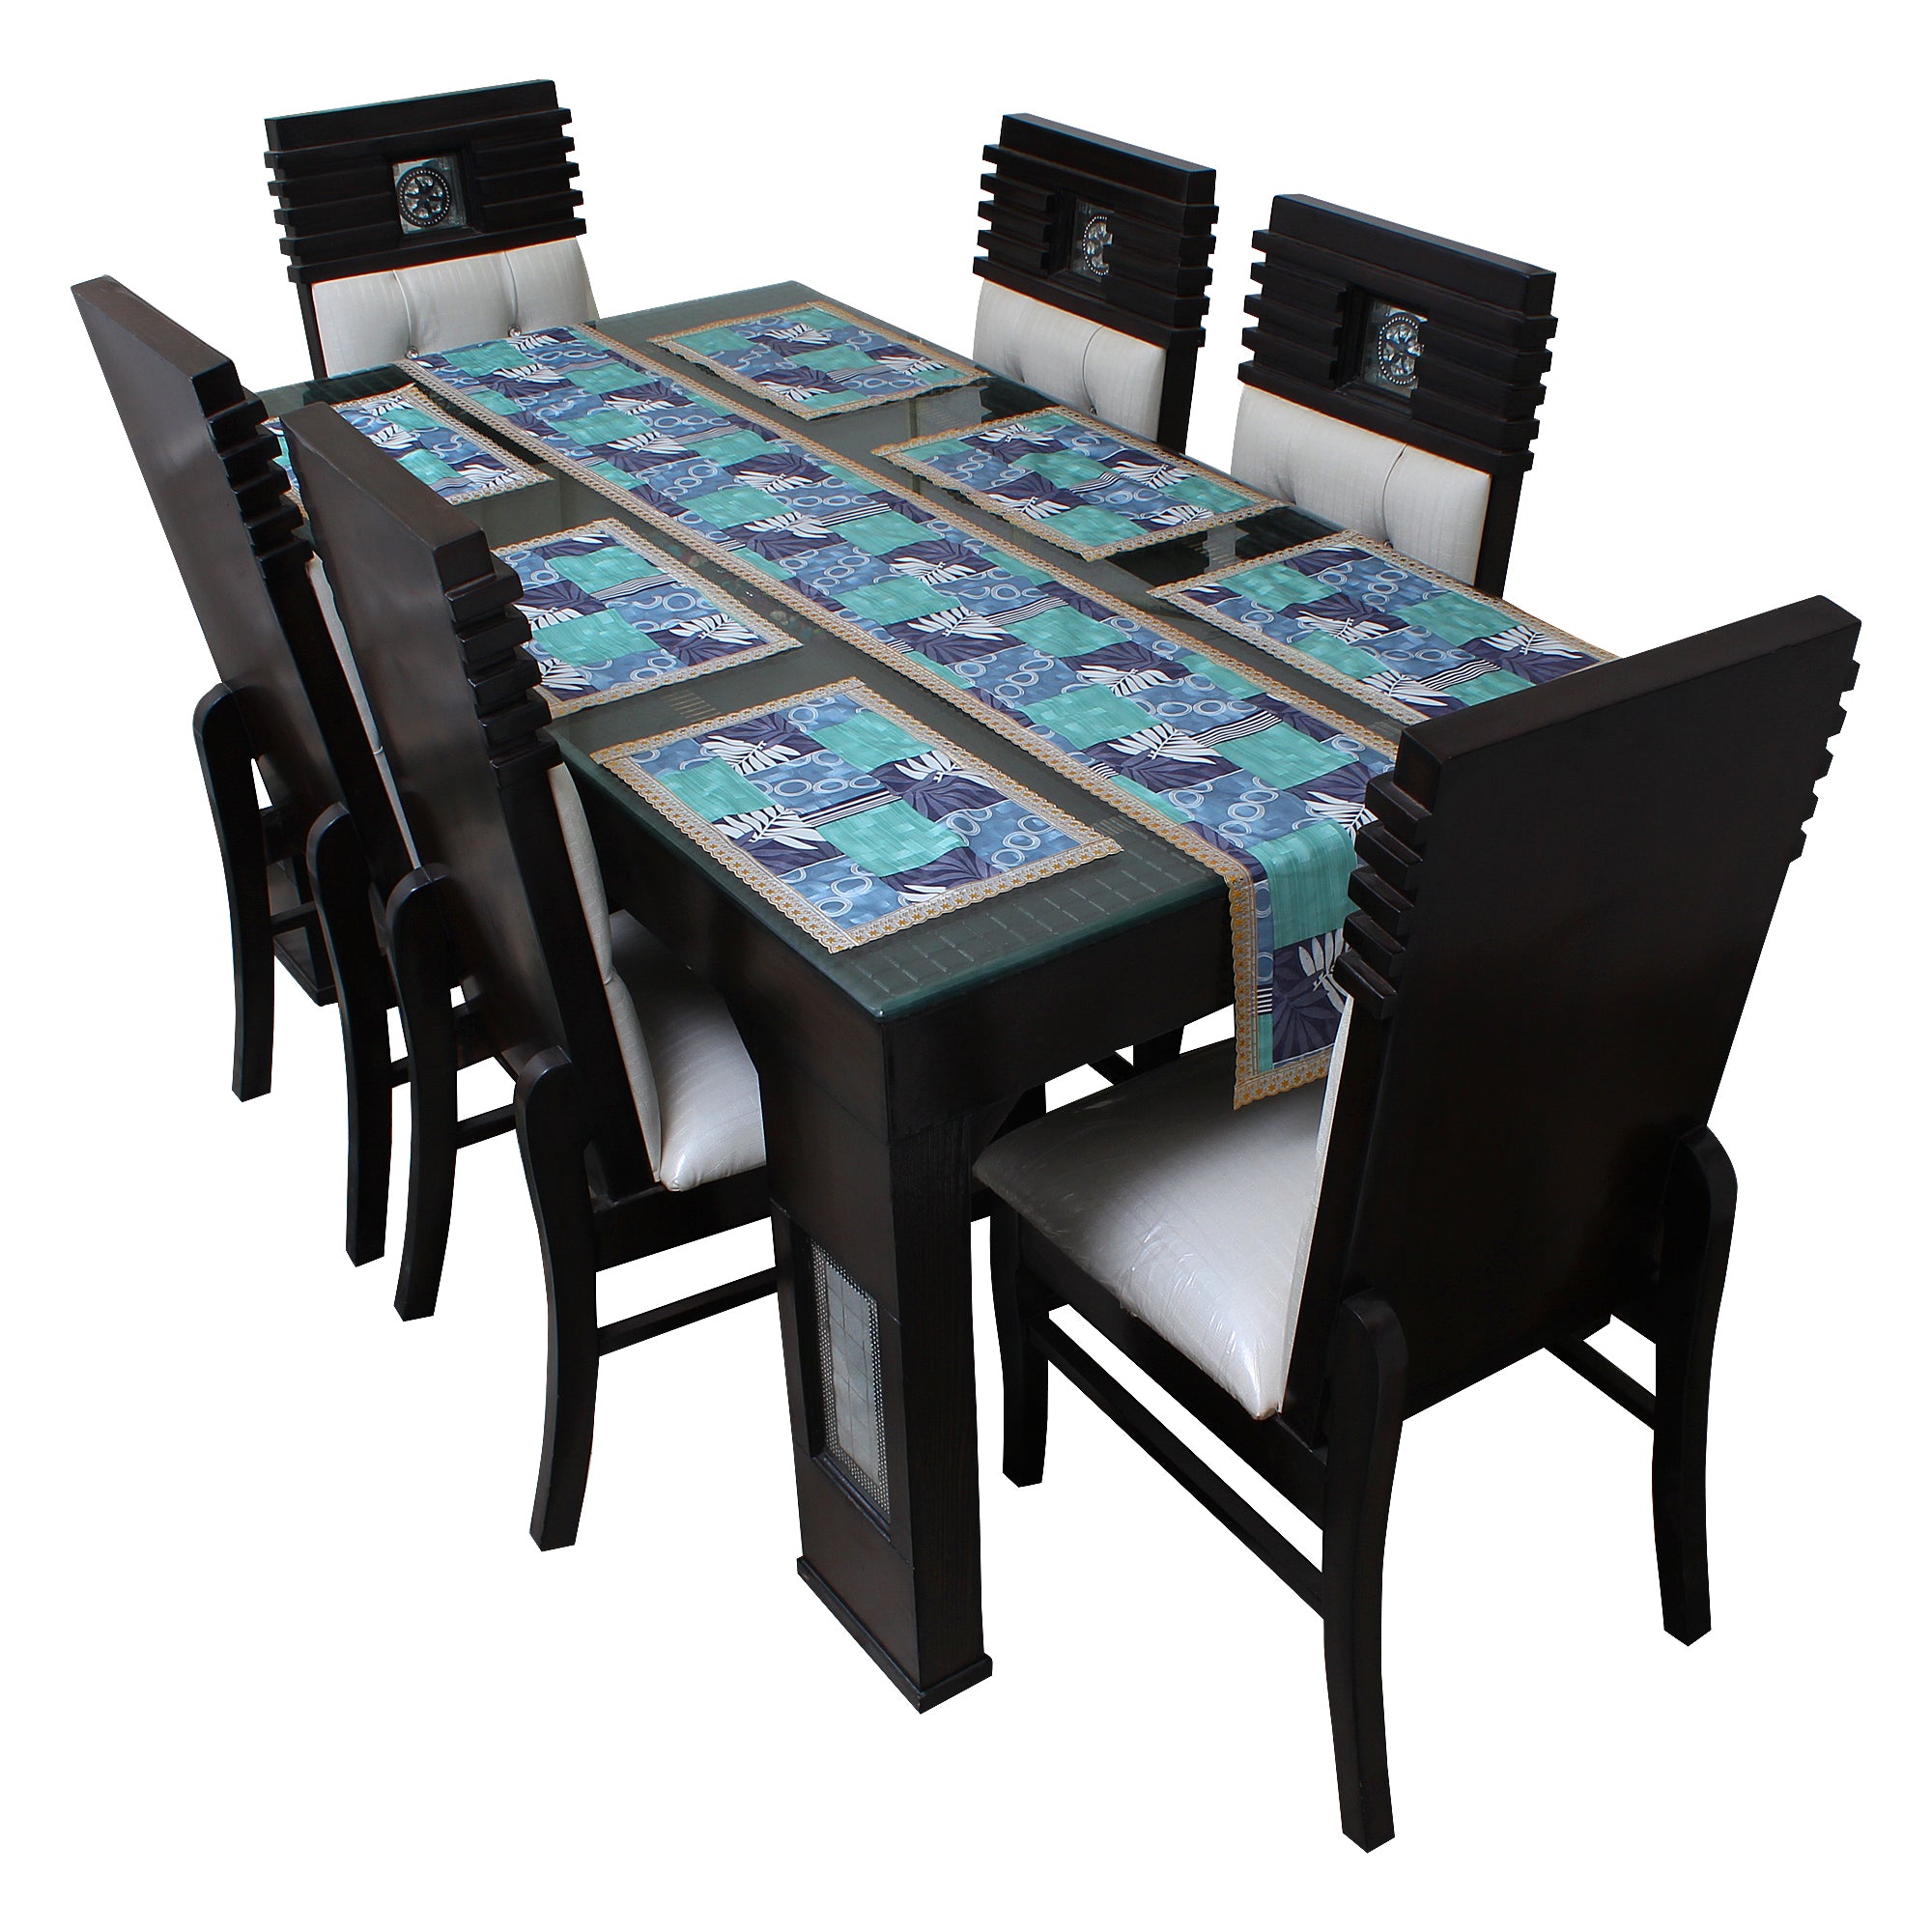 Waterproof & Dustproof Dining Table Runner With 6 Placemats, SA43 - Dream Care Furnishings Private Limited